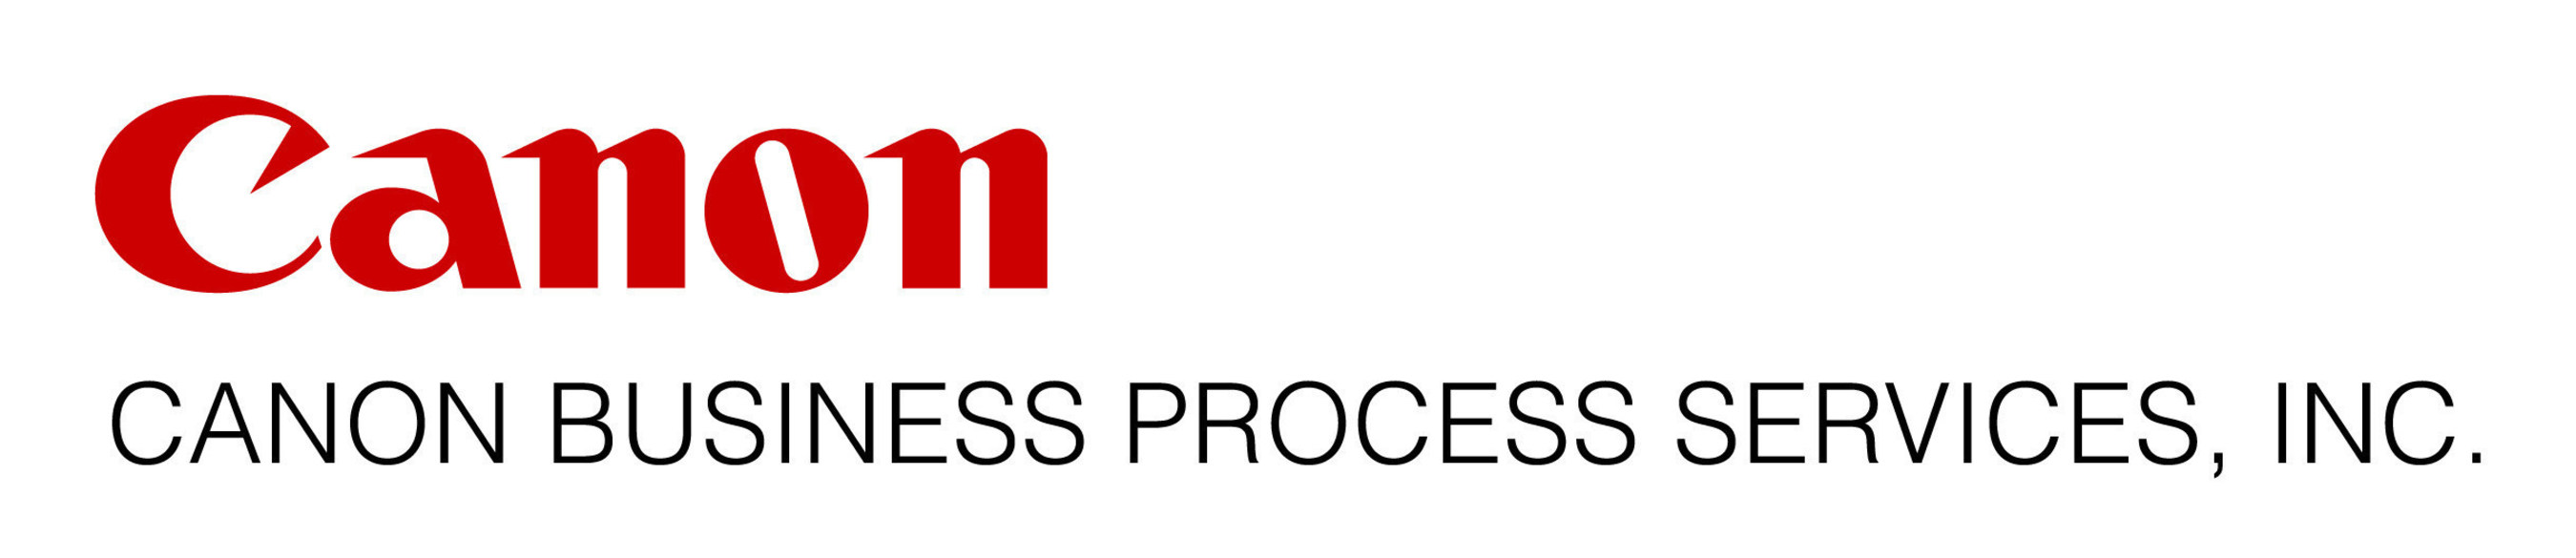 Advancing business performance to a higher level. (PRNewsFoto/Canon Business Process Services)